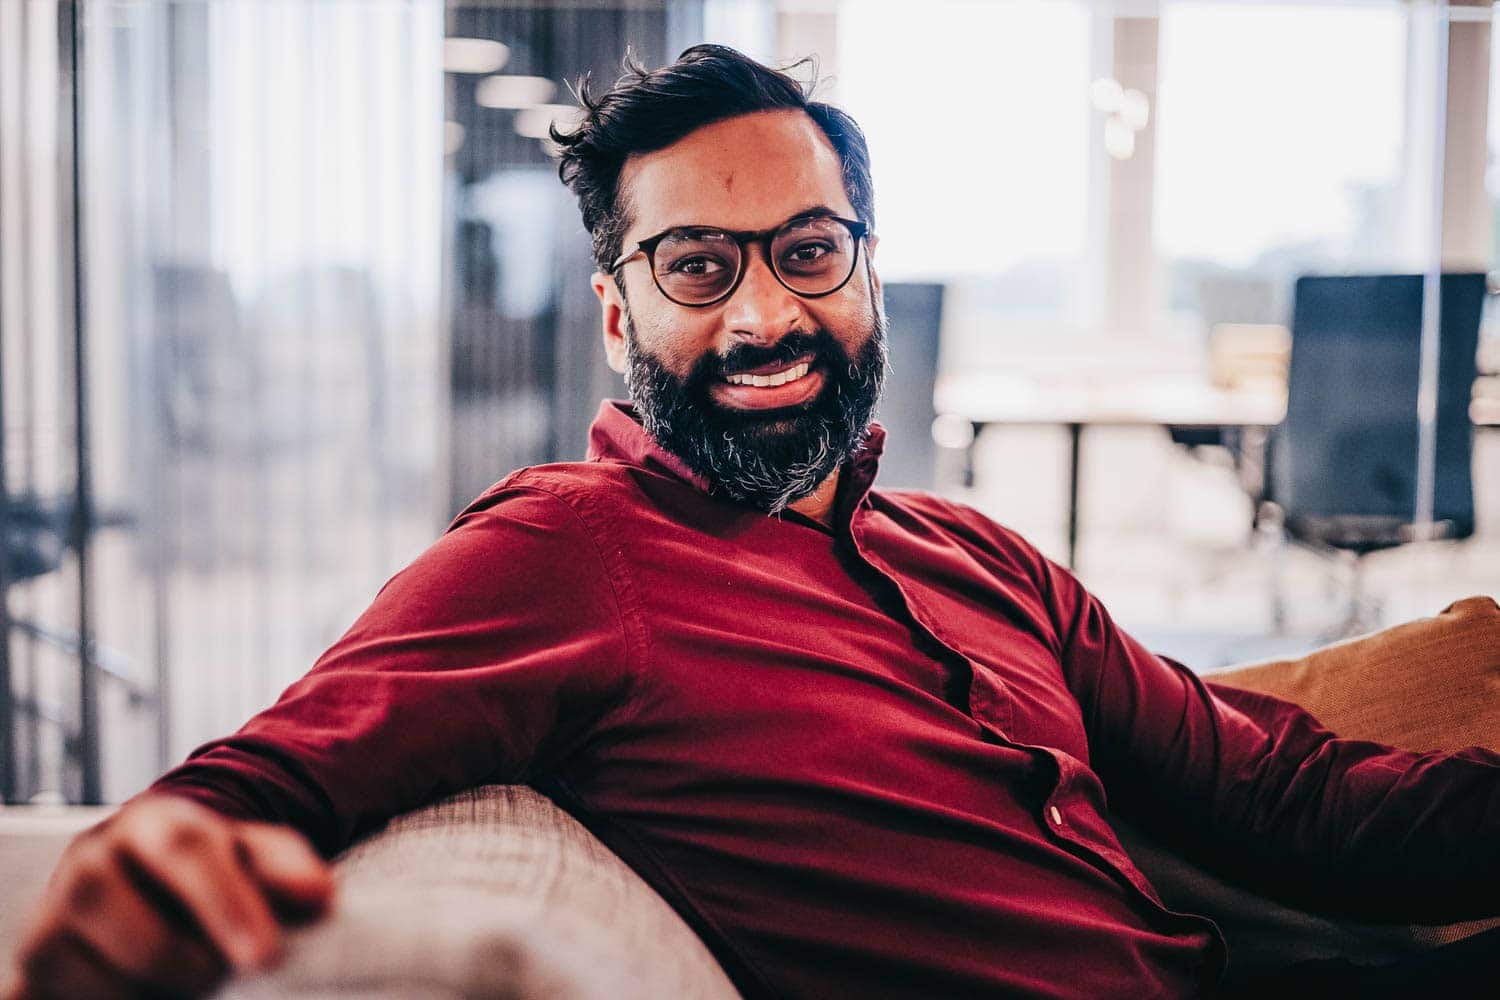 A smiling Rahman sitting on a couch looks into the camera.